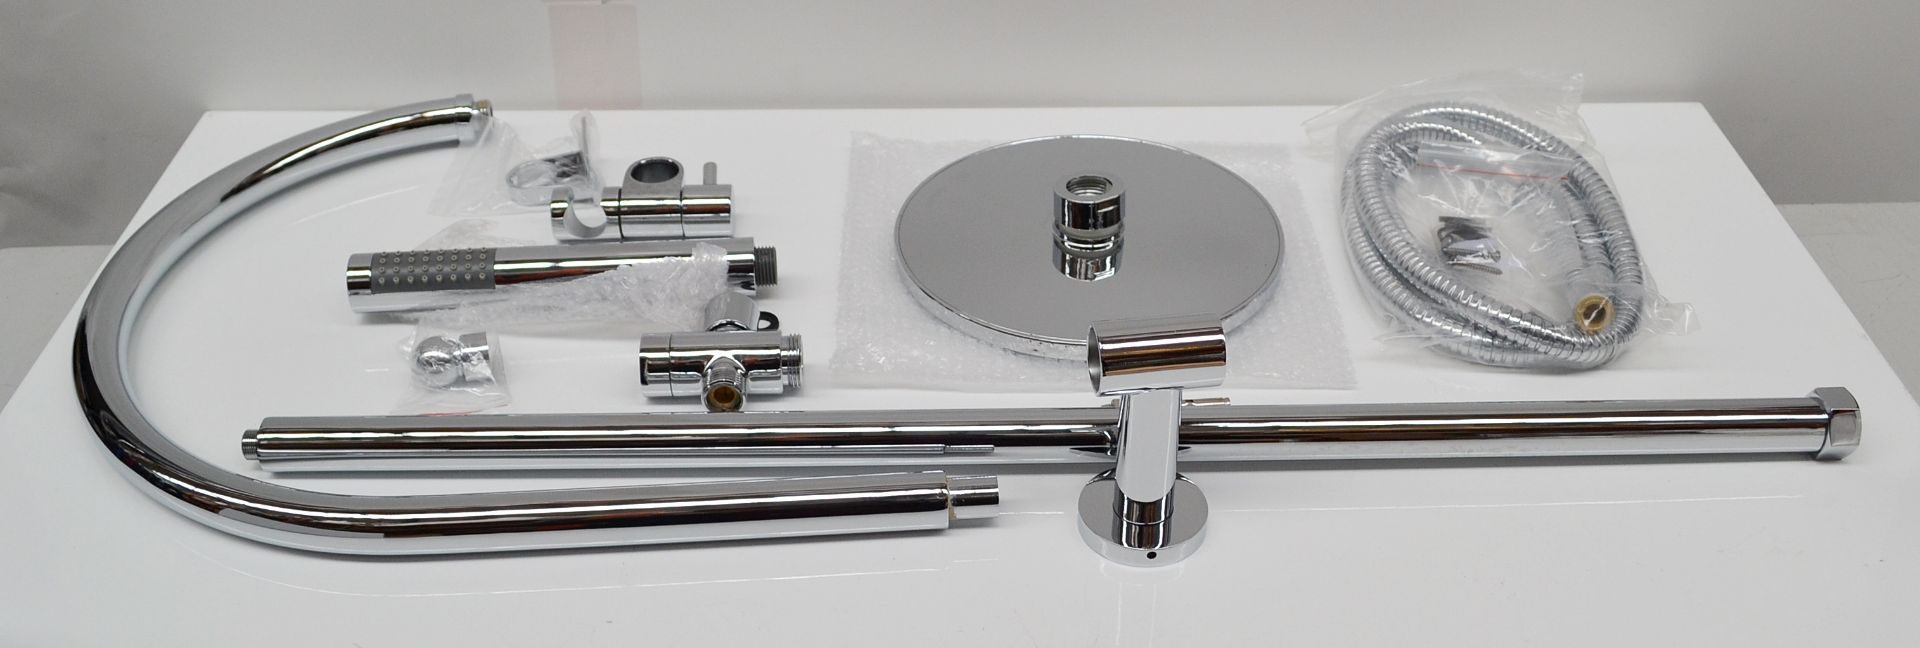 1 x ZEPHYR Shower Kit with Round Head and Minimalist Handset - Chrome - Ref: MBI004 - CL190 - H116 x - Image 3 of 7